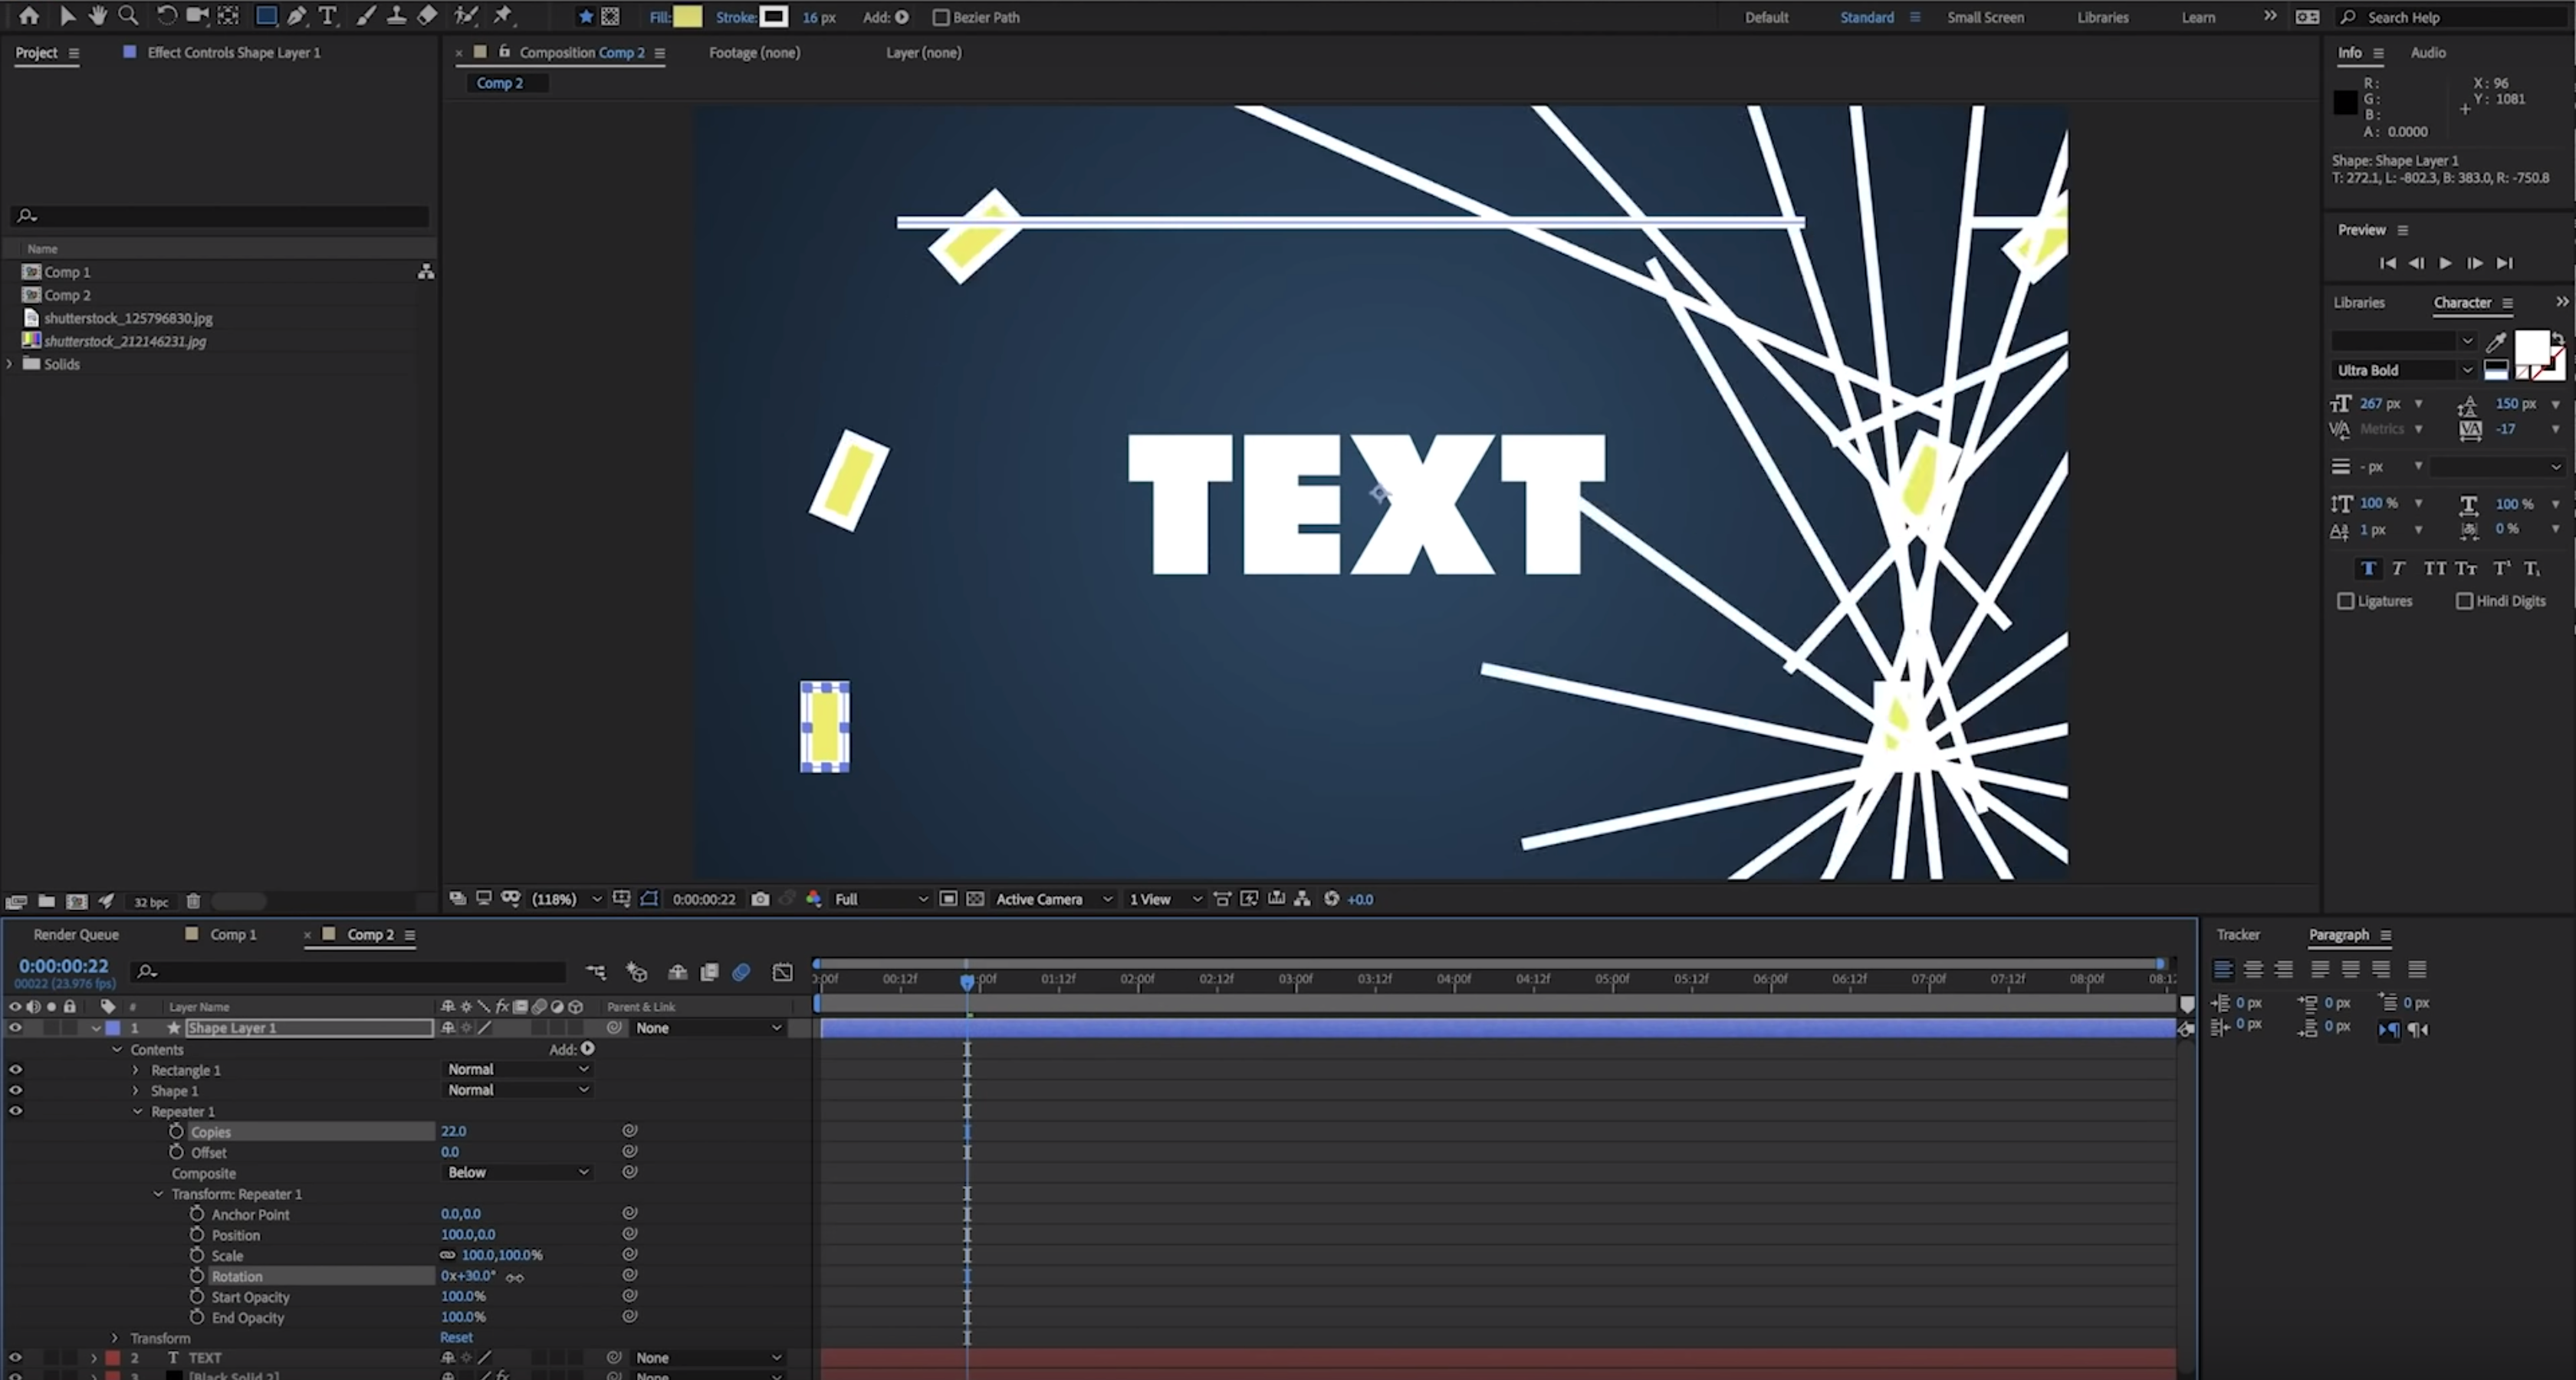 10 More Techniques That Will Turn You Into An After Effects Rock Star